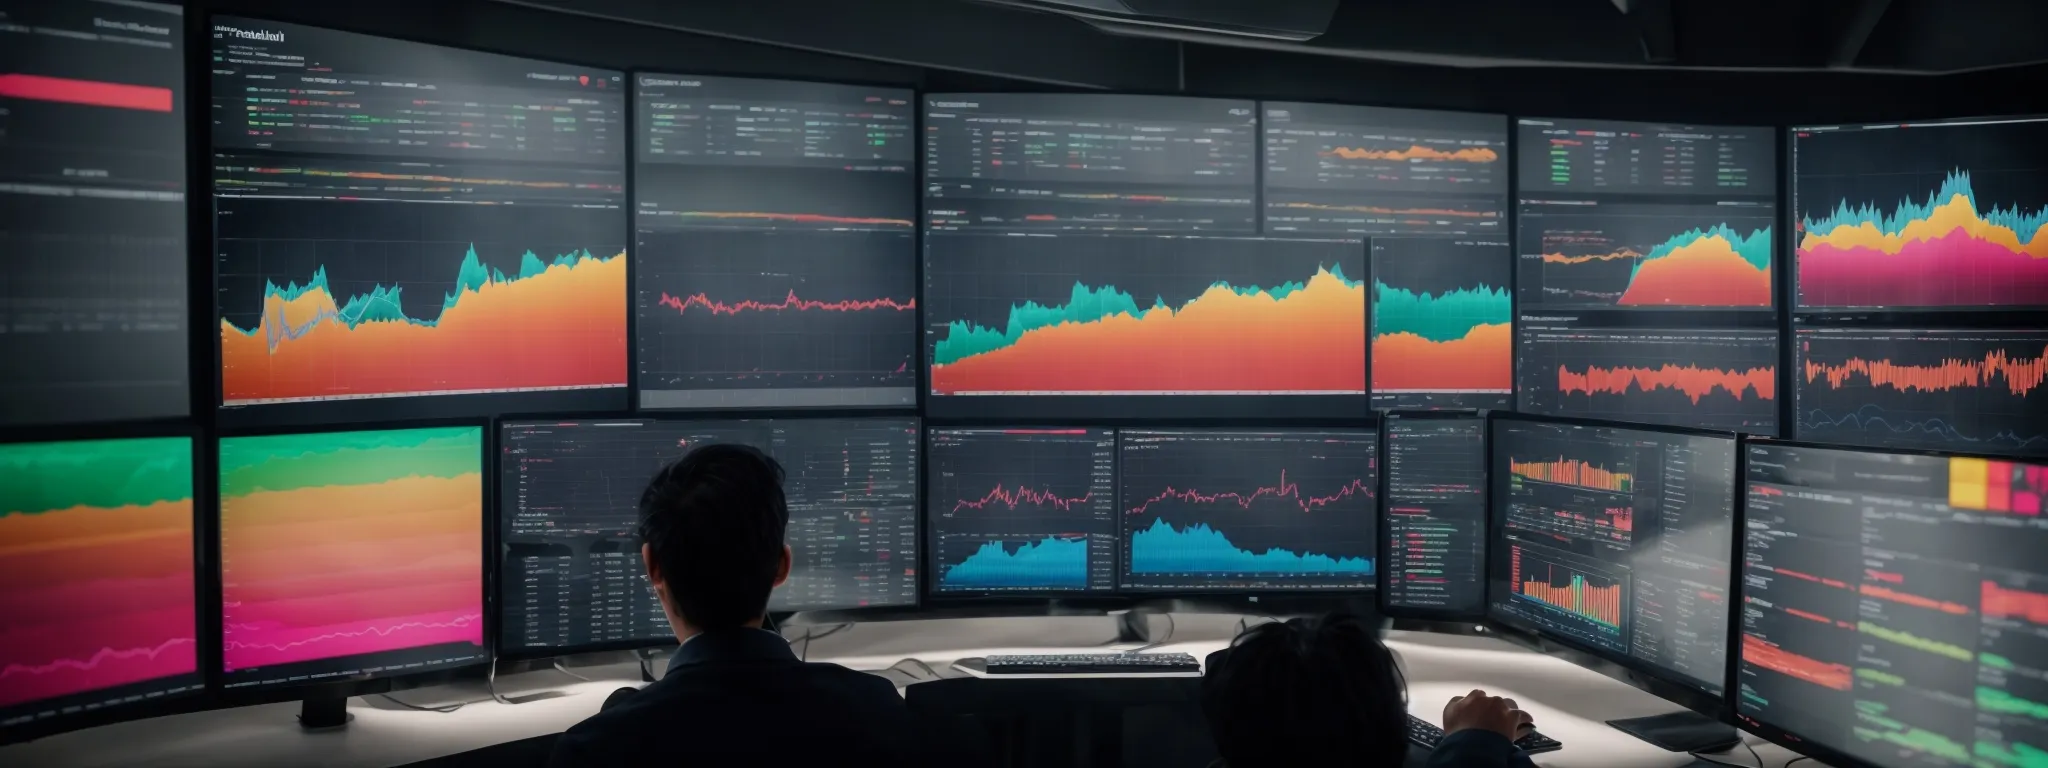 a person sits at a large monitor displaying colorful graphs and charts while clicking through an analytics dashboard.